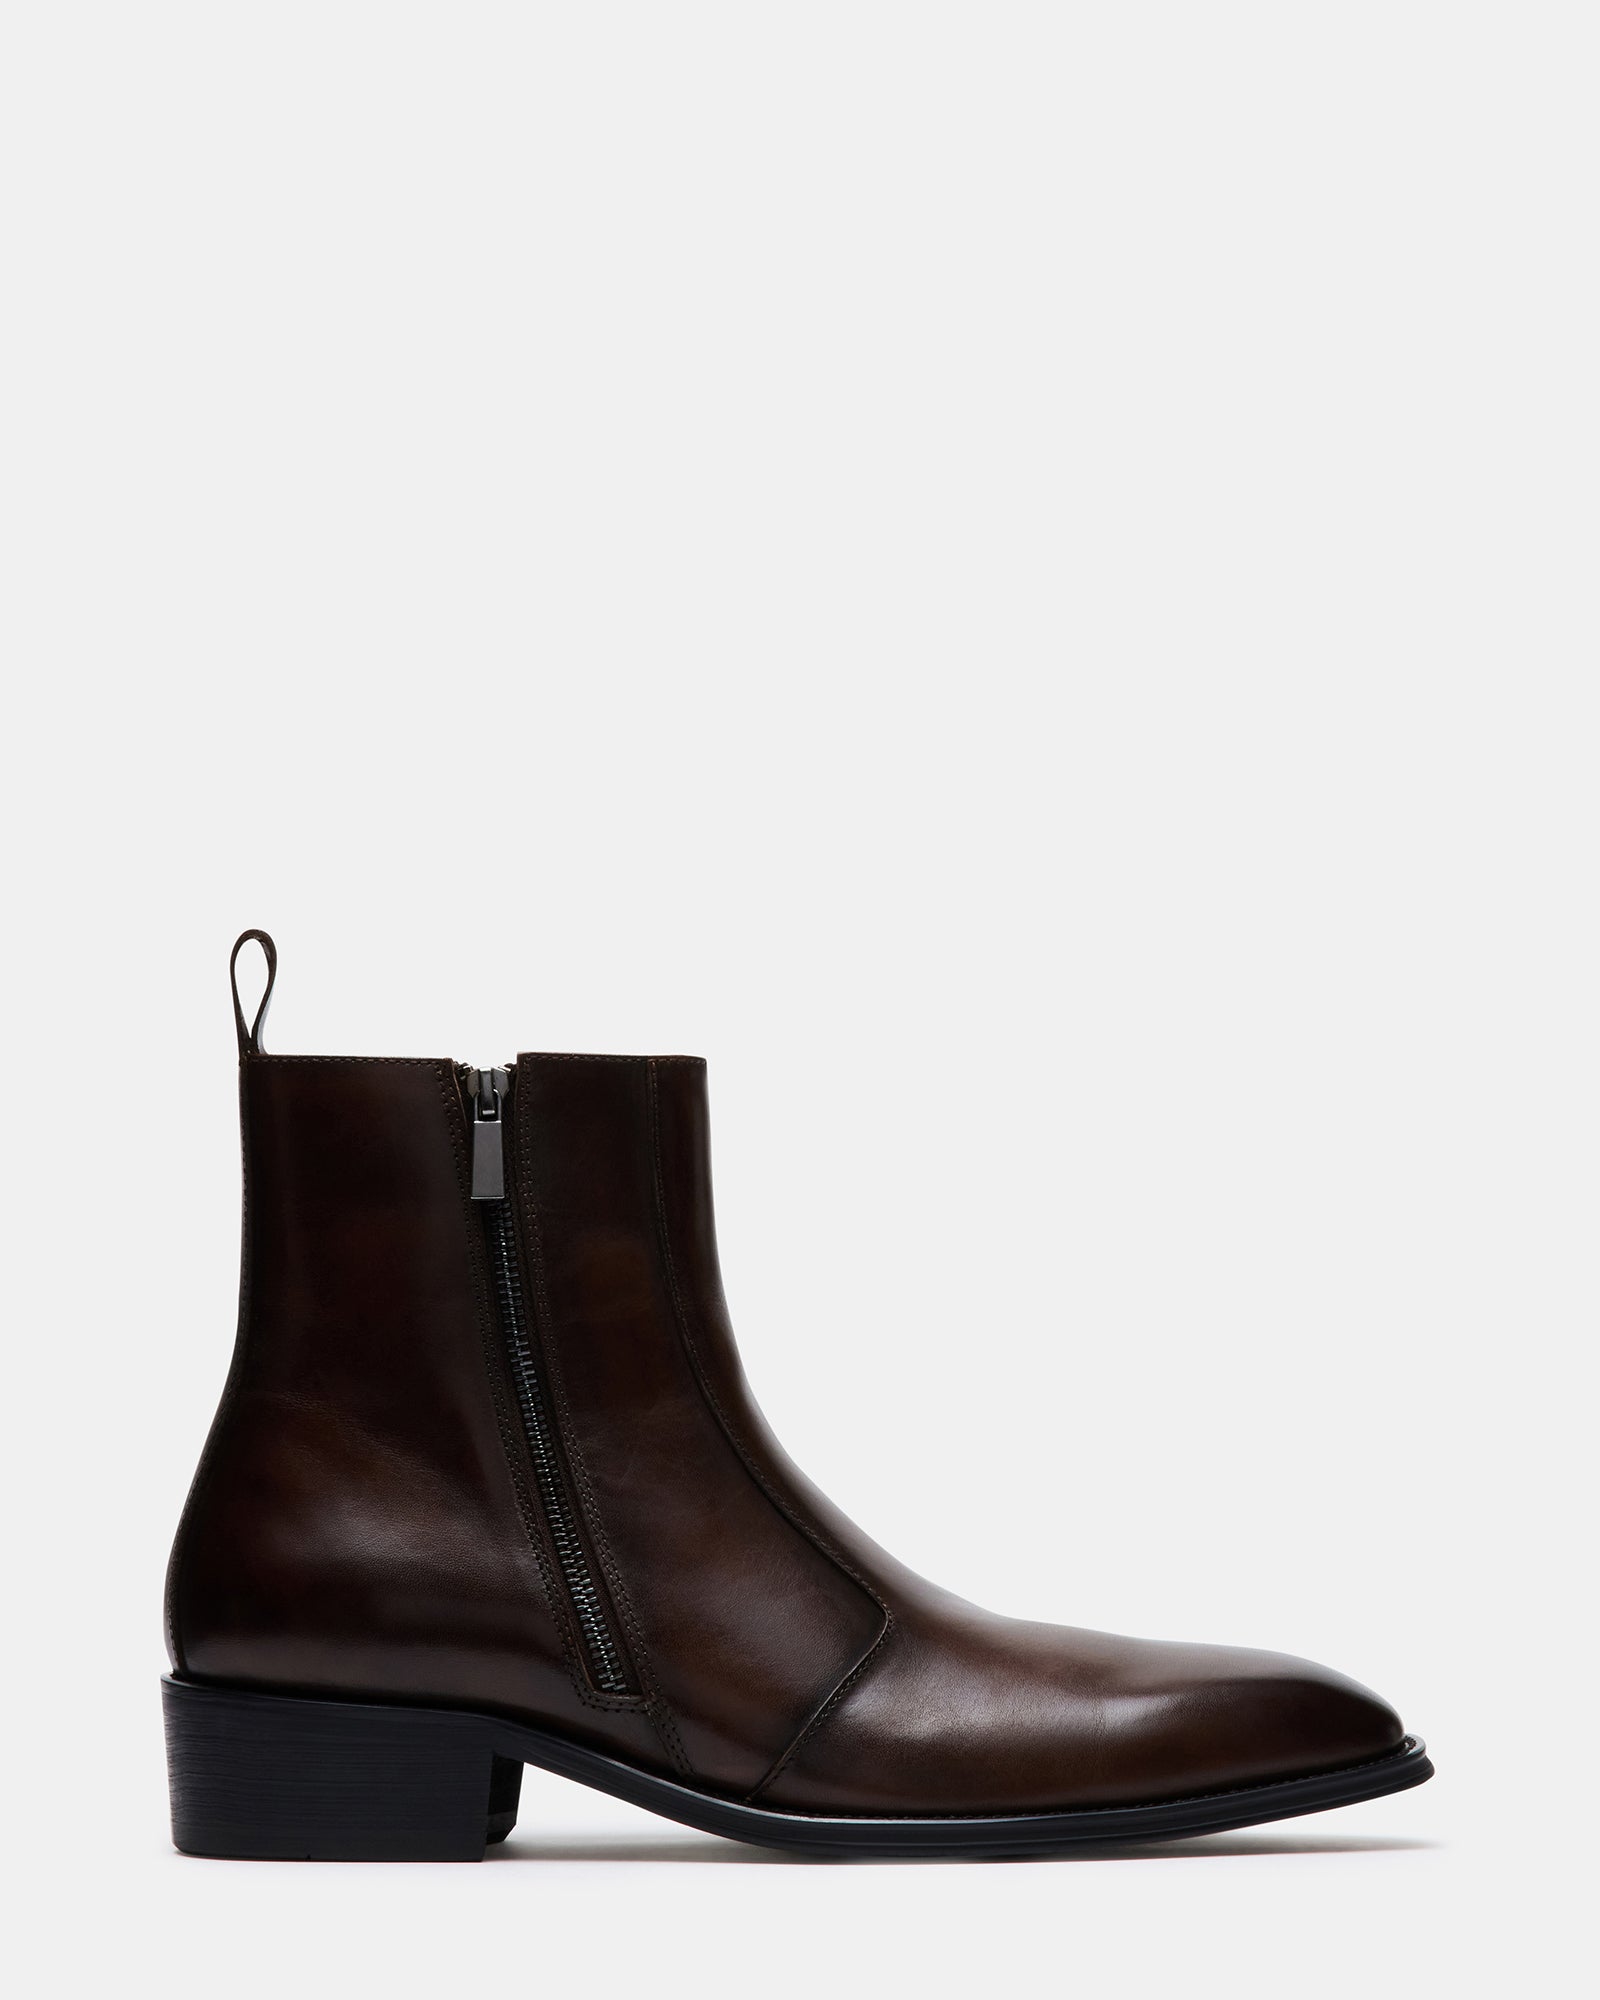 HAYNES Brown Leather Ankle Boot | Men's Boots – Steve Madden